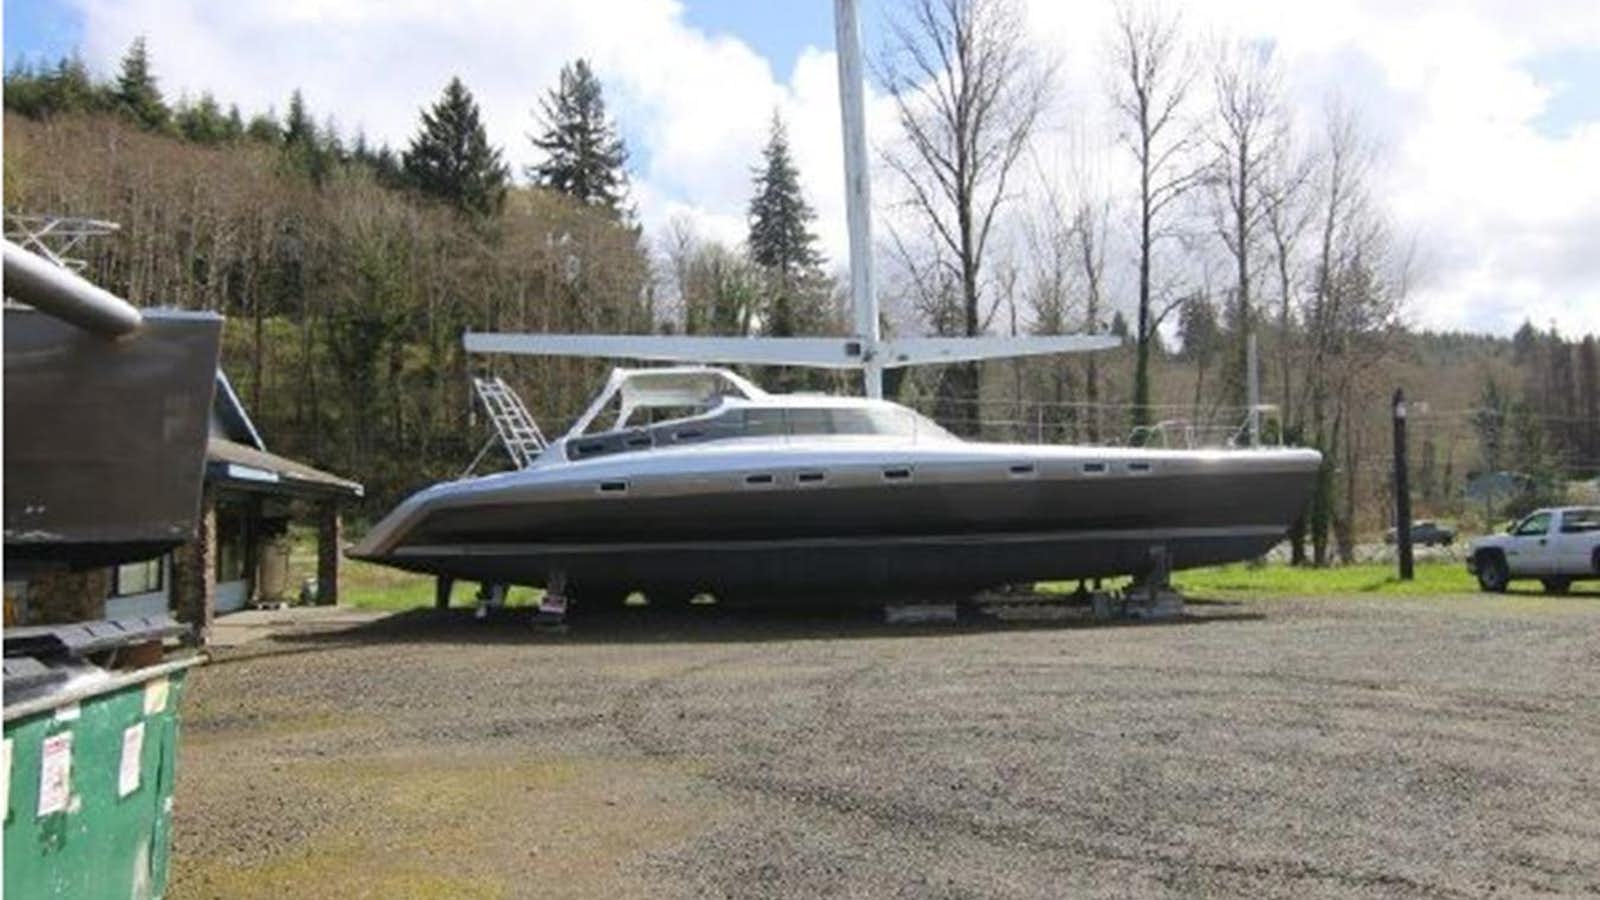 2023 pdigree cat bloomfield
Yacht for Sale